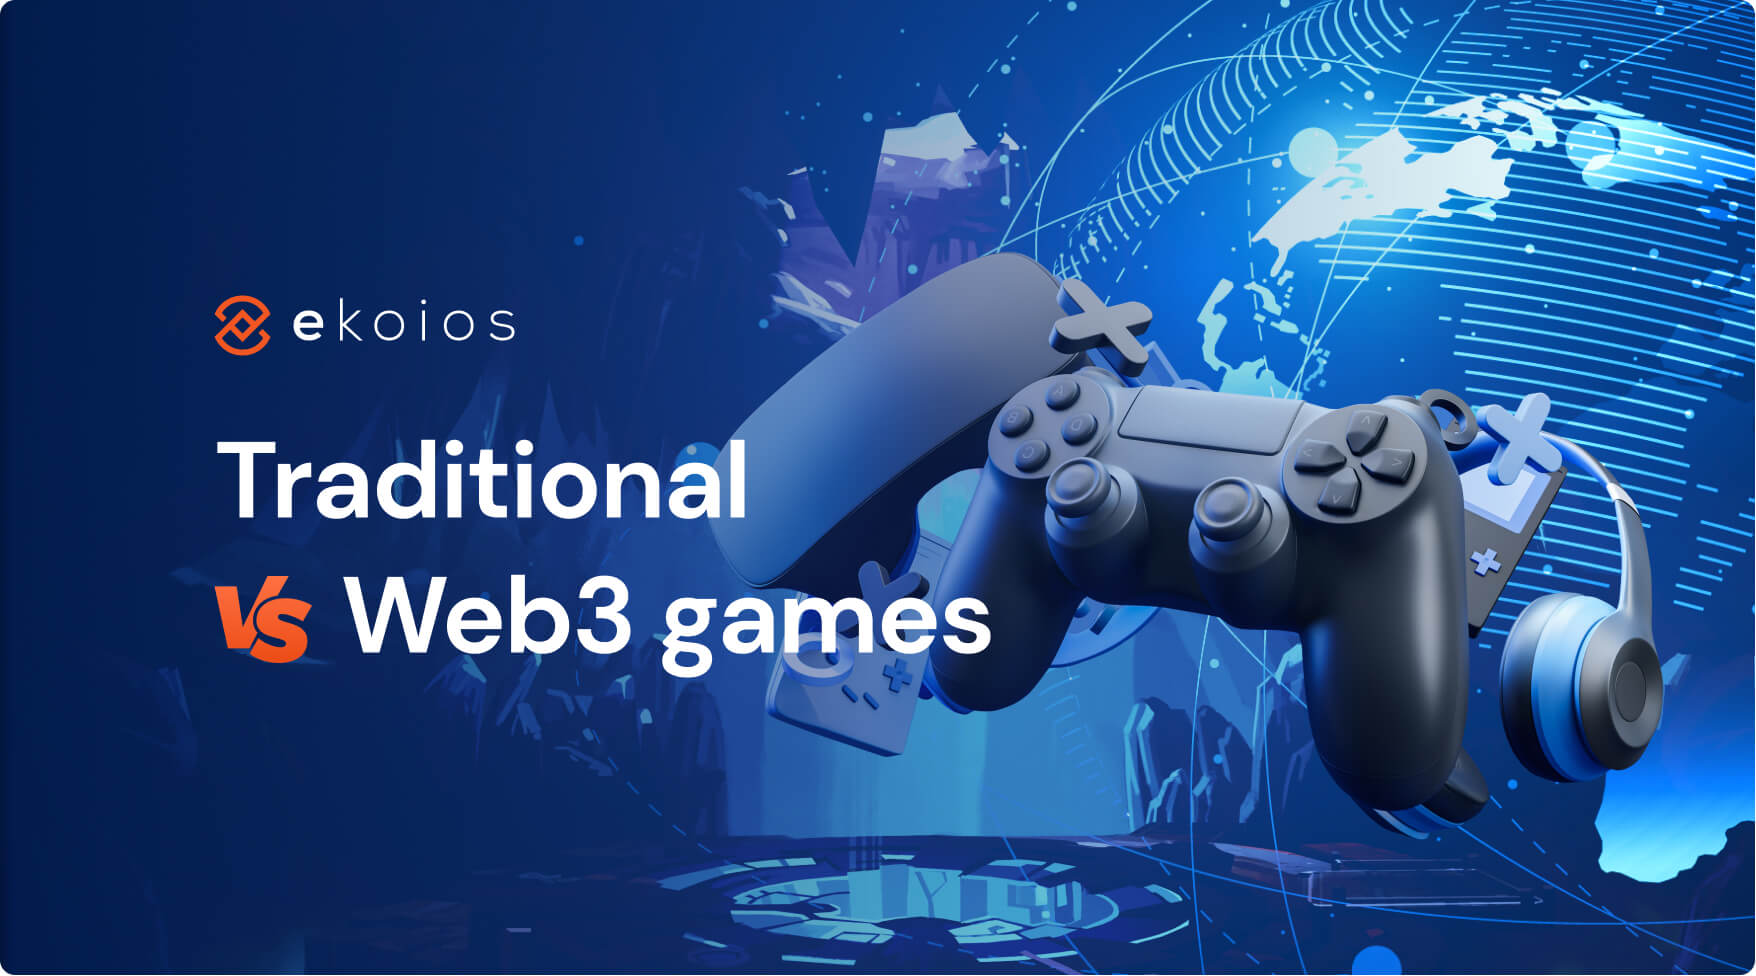 What is Web3 Gaming? How is it different from Traditional Gaming?